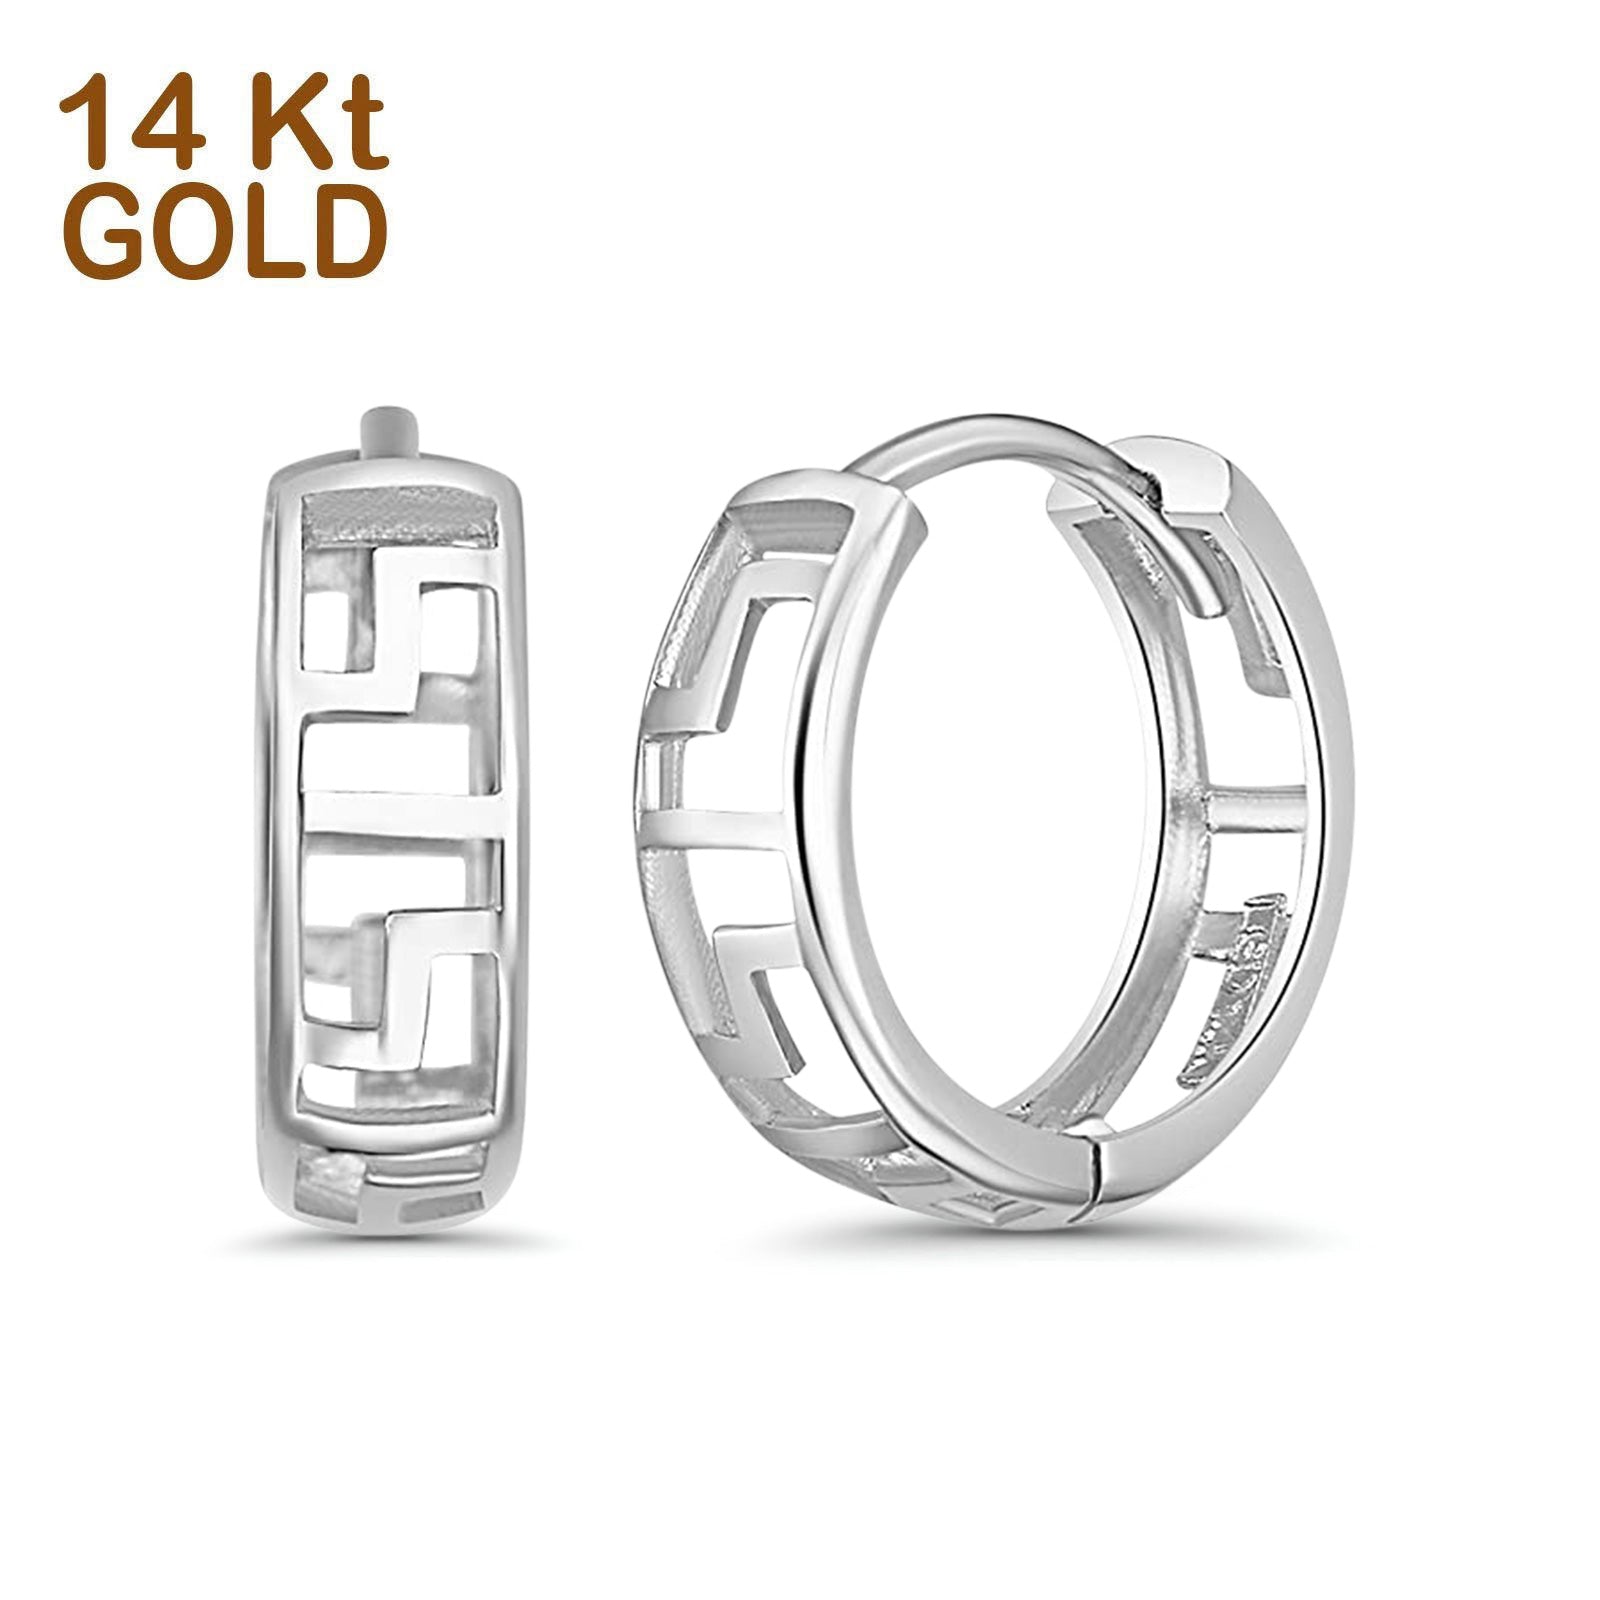 Solid 14K White Gold & Yellow Gold 4mm Thickness Hoop Earrings Best Anniversary Birthday Gift for Her Greek Key